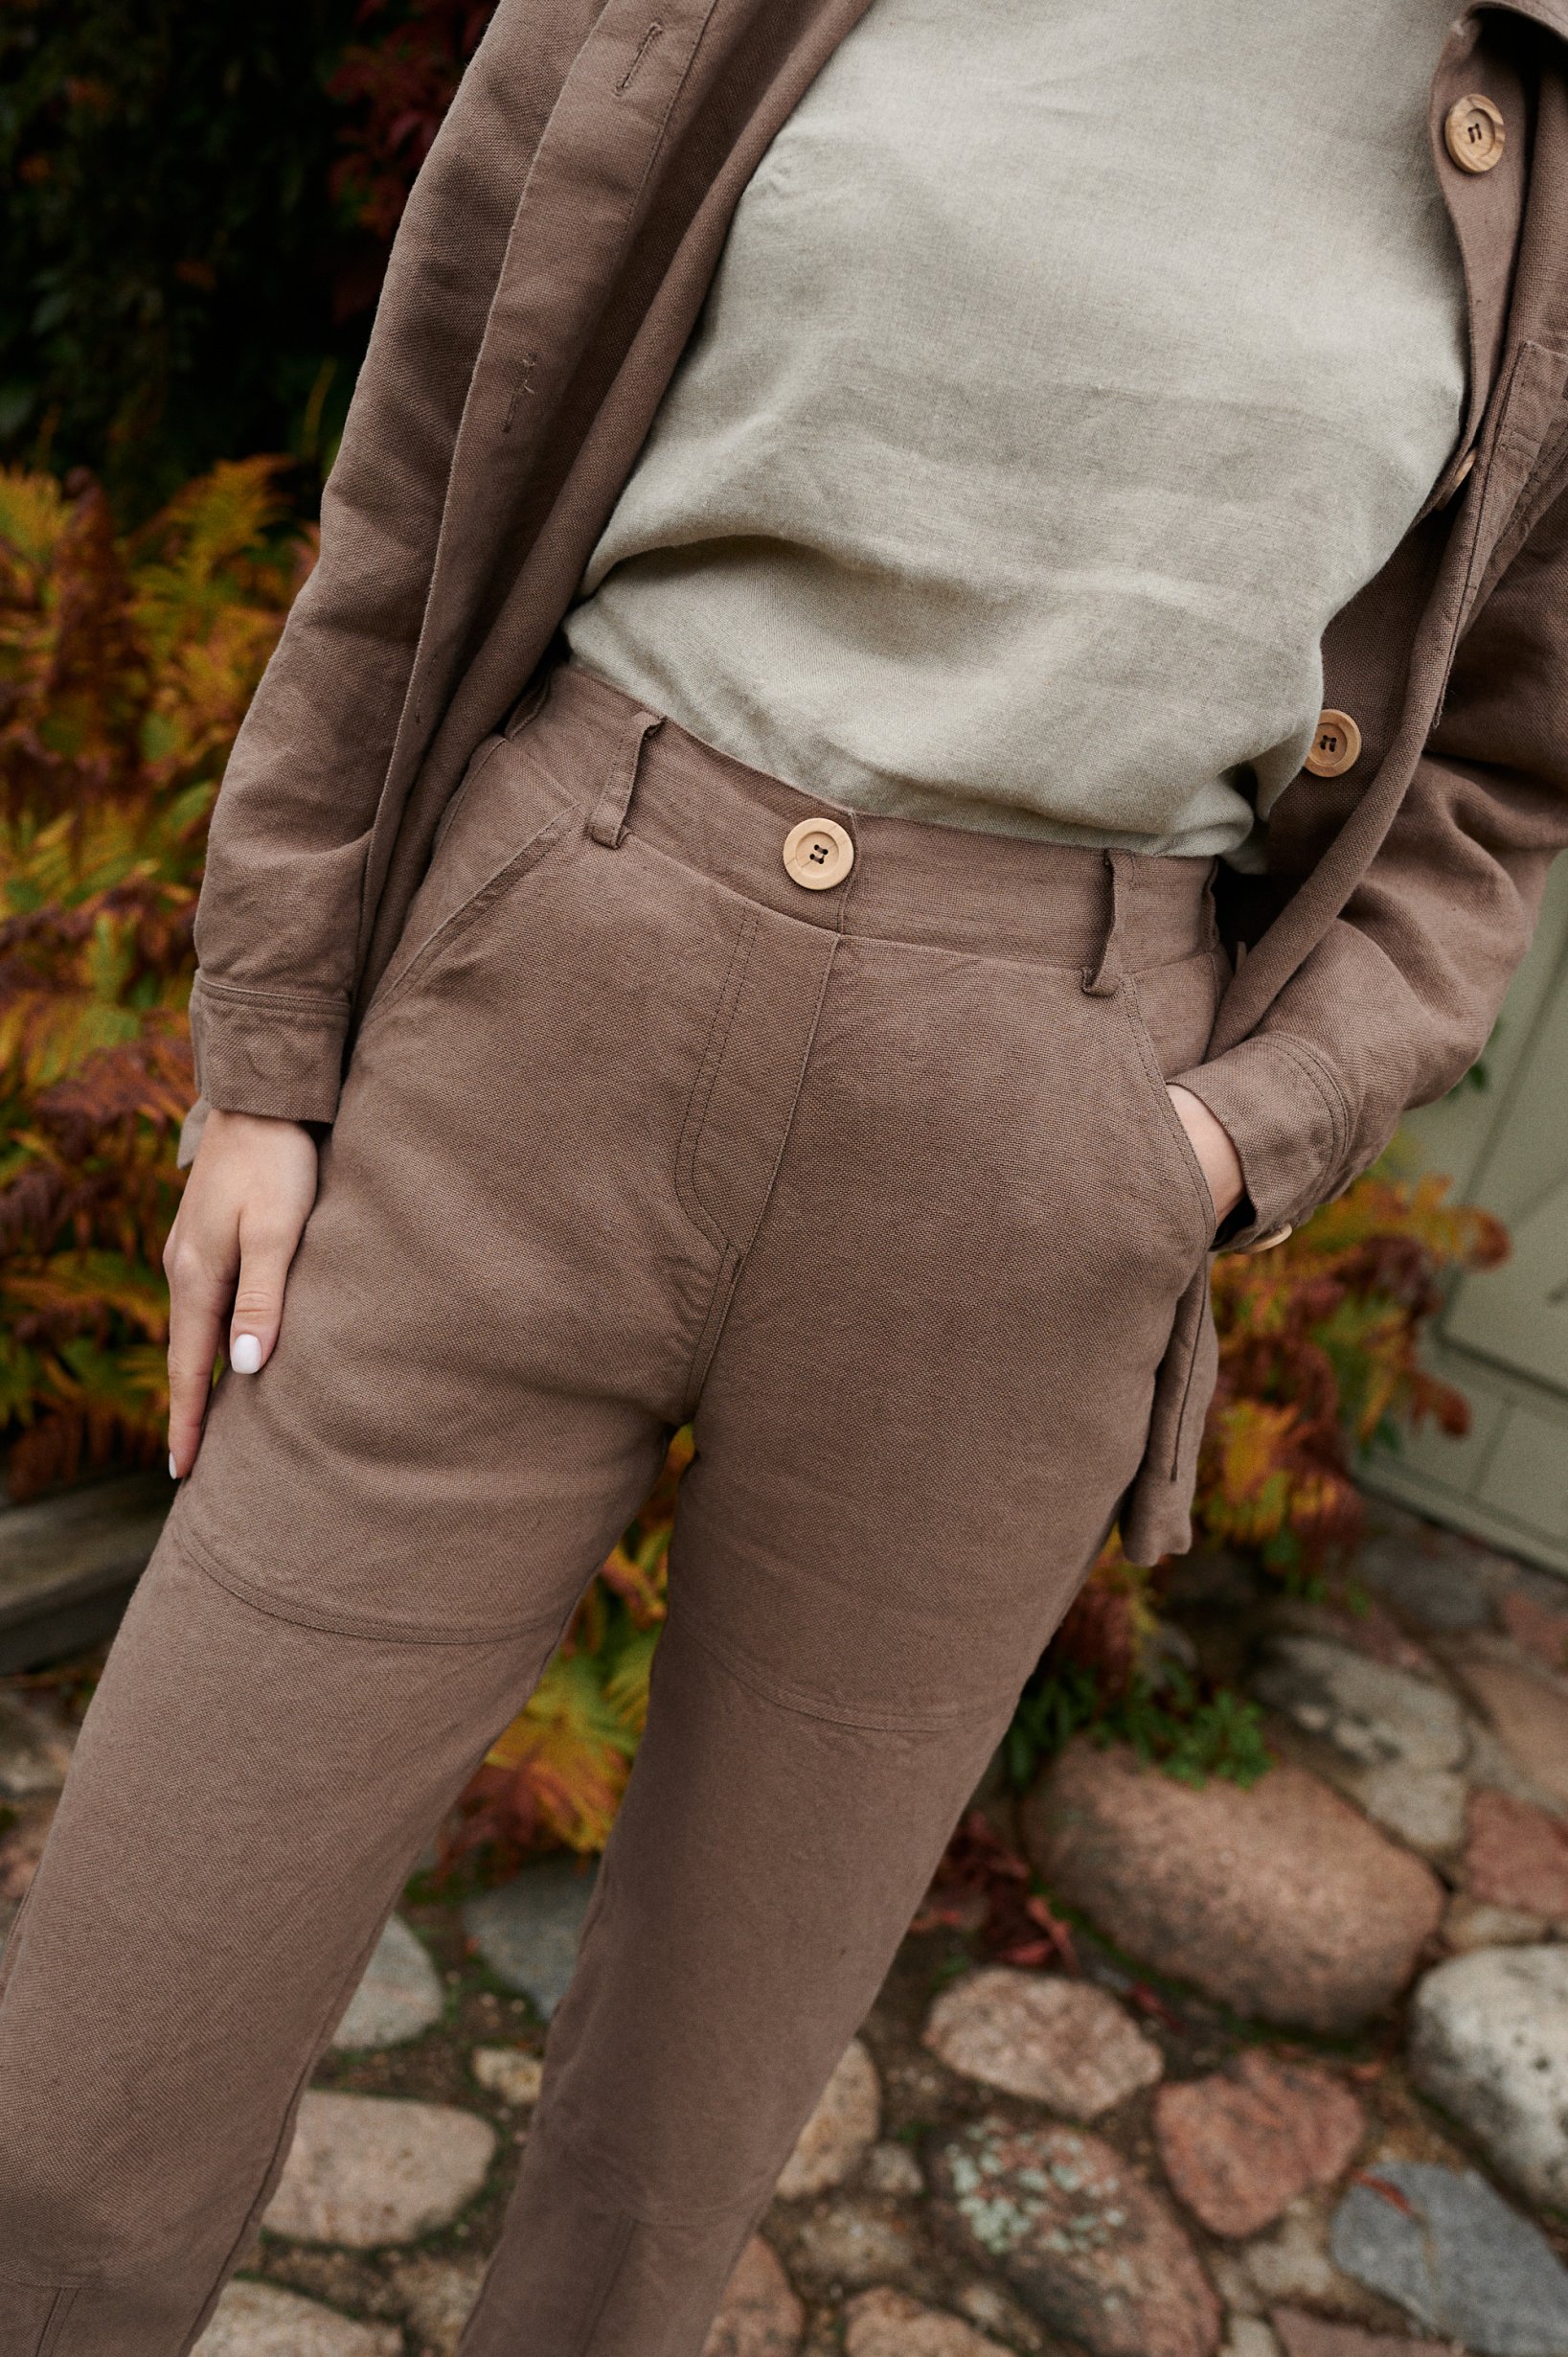 Brown utility linen trousers with a decorative wooden button and size pockets